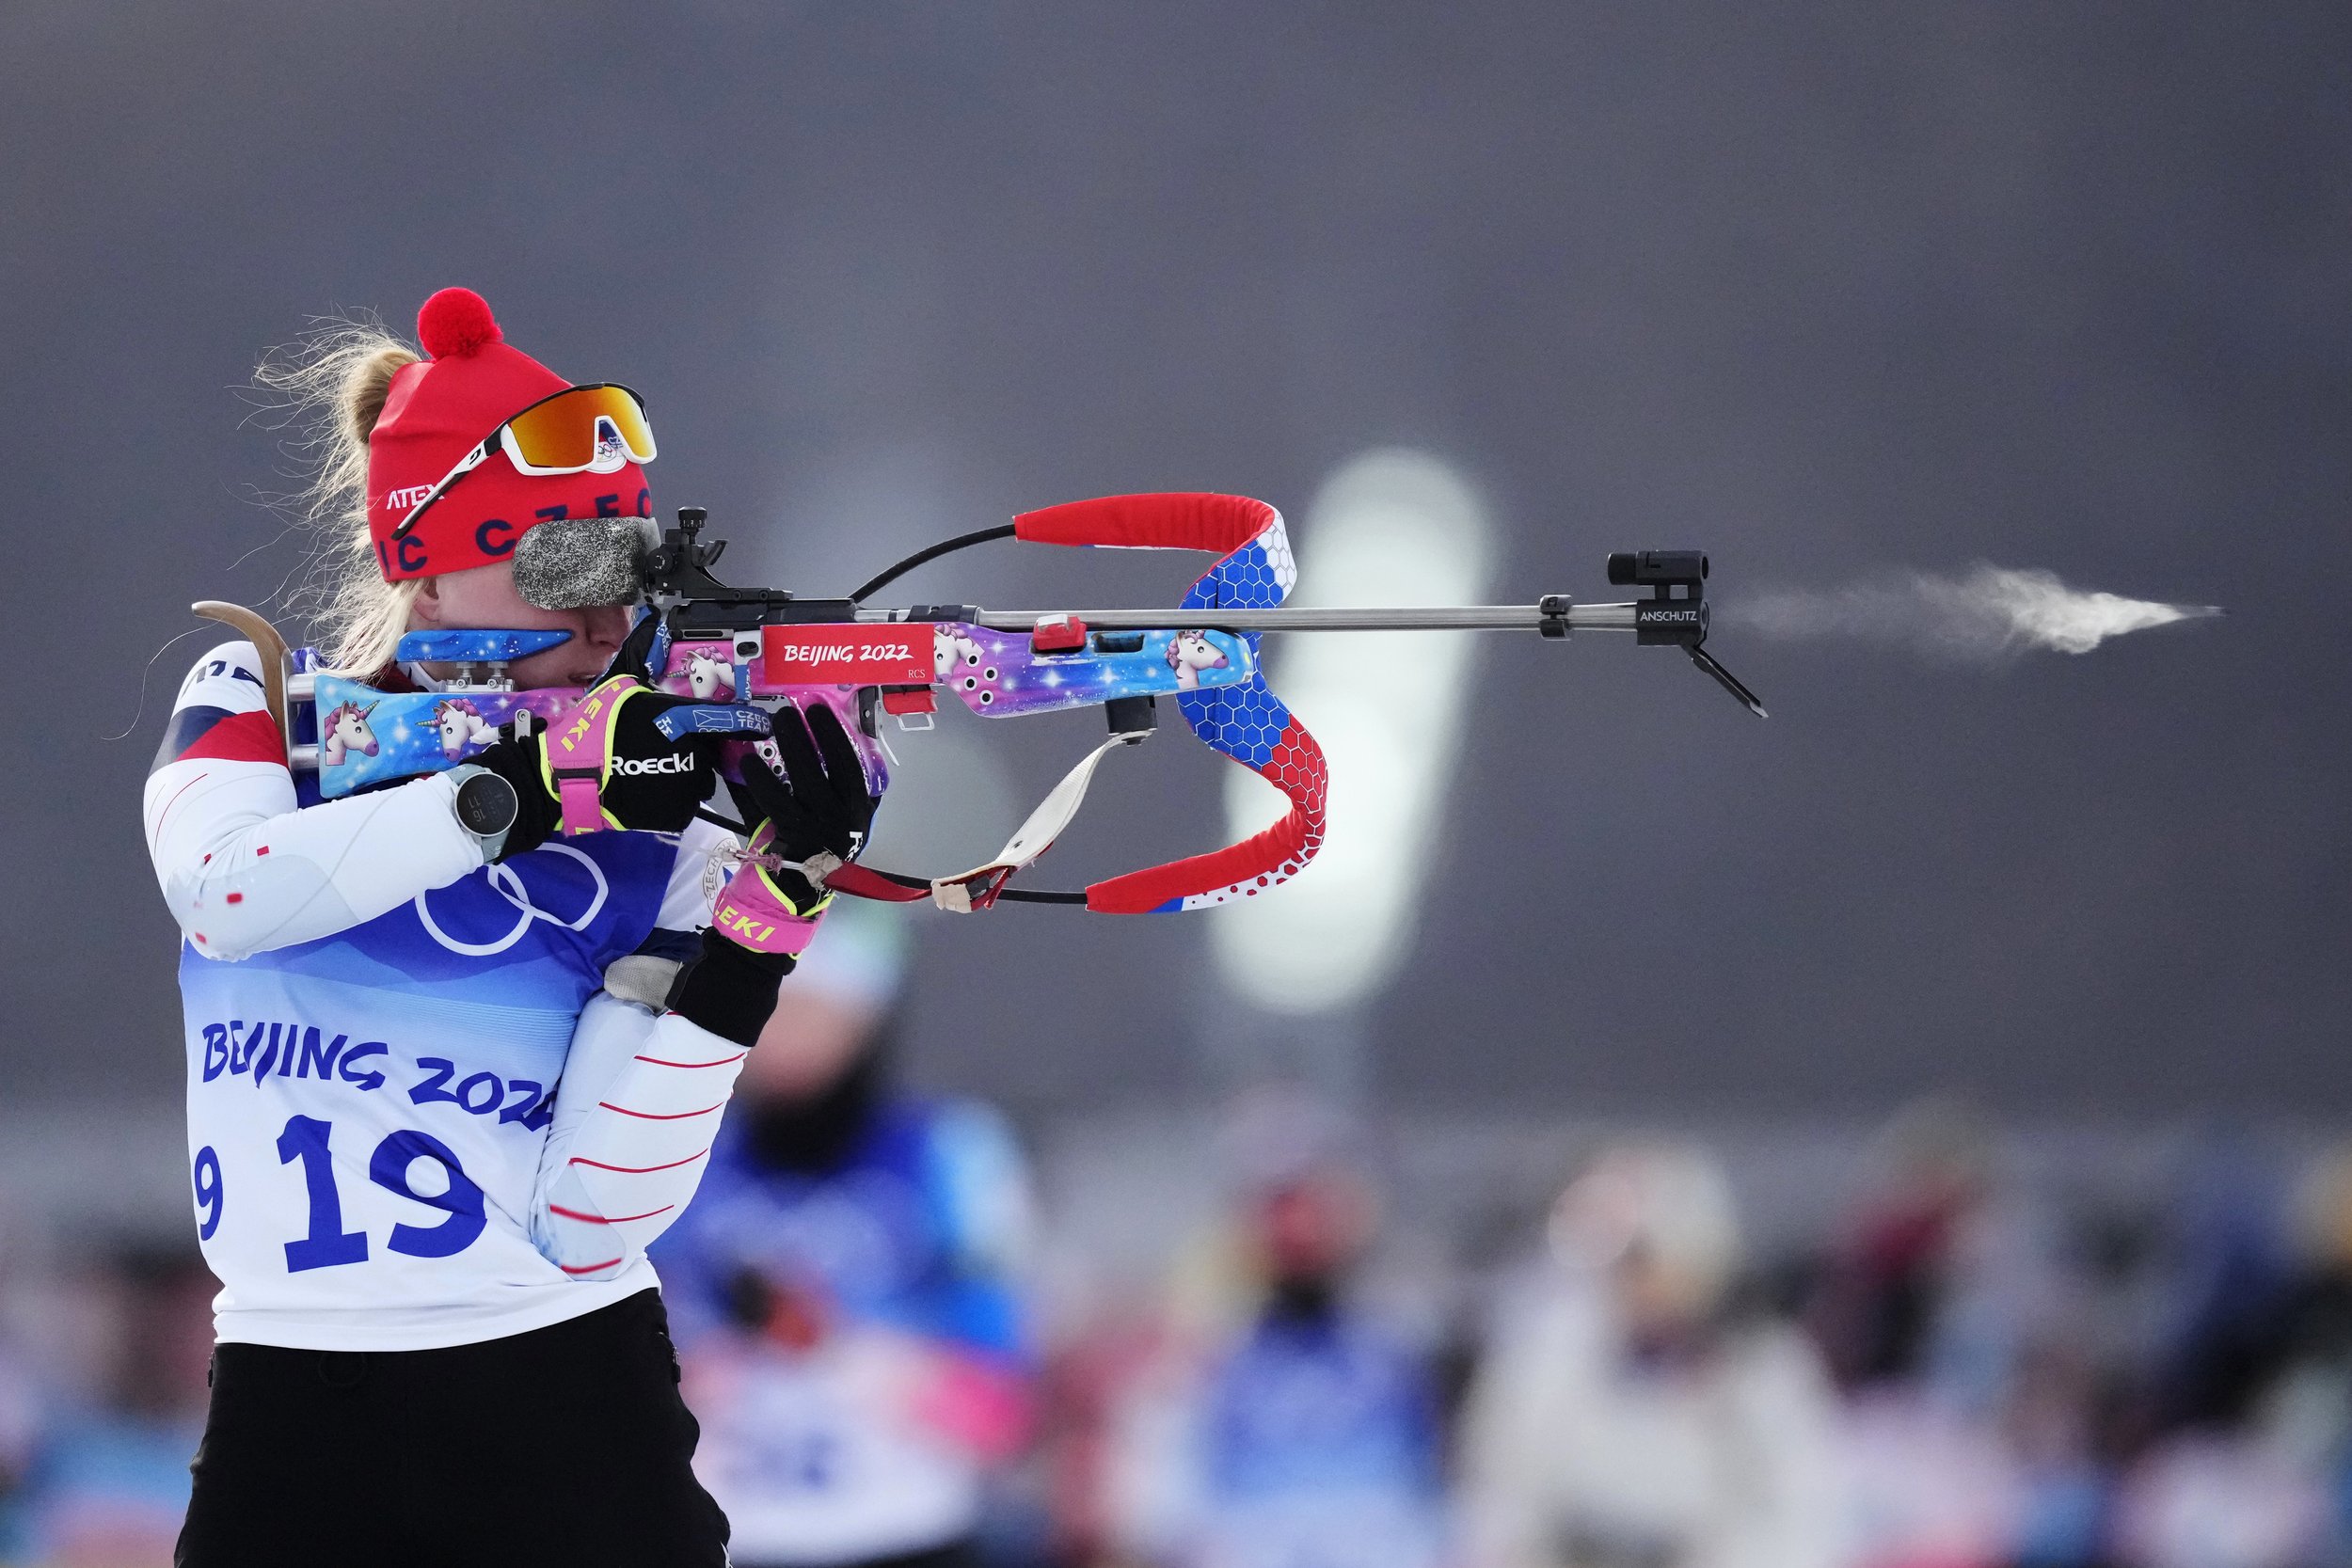  Marketa Davidova of the Czech Republic practices shooting before the women's 7.5-kilometer sprint competition at the 2022 Winter Olympics, Friday, Feb. 11, 2022, in Zhangjiakou, China. (AP Photo/Frank Augstein) 